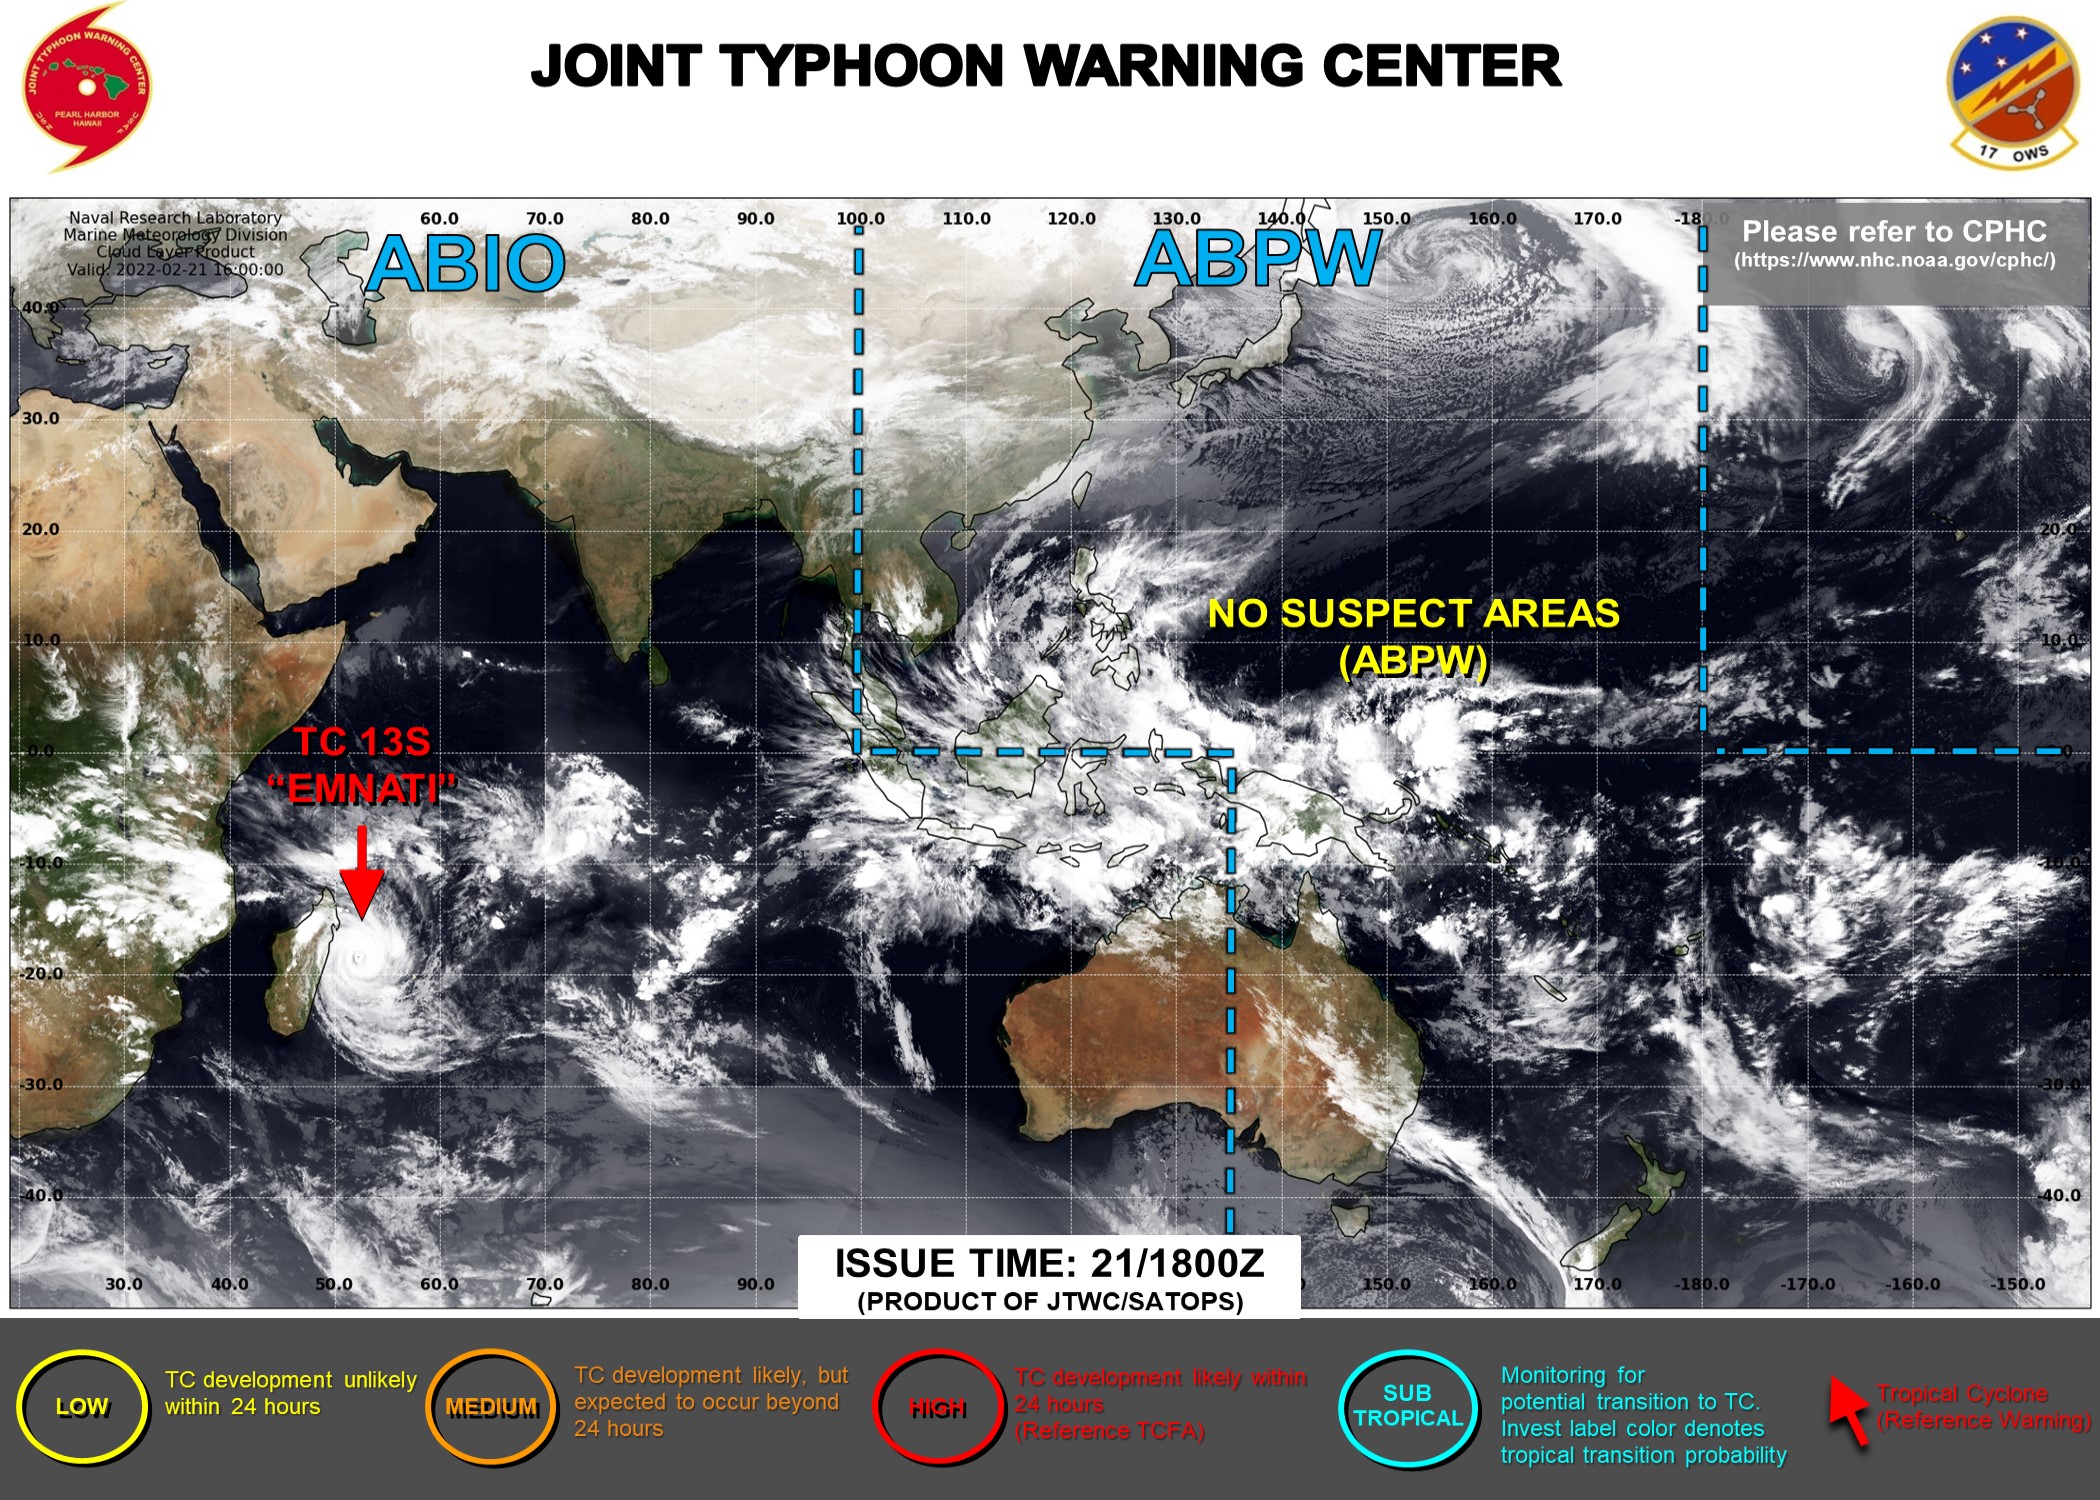 JTWC IS ISSUING 12HOURLY WARNINGS AND 3HOURLY SATELLITE BULLETINS ON TC 13S(EMNATI).